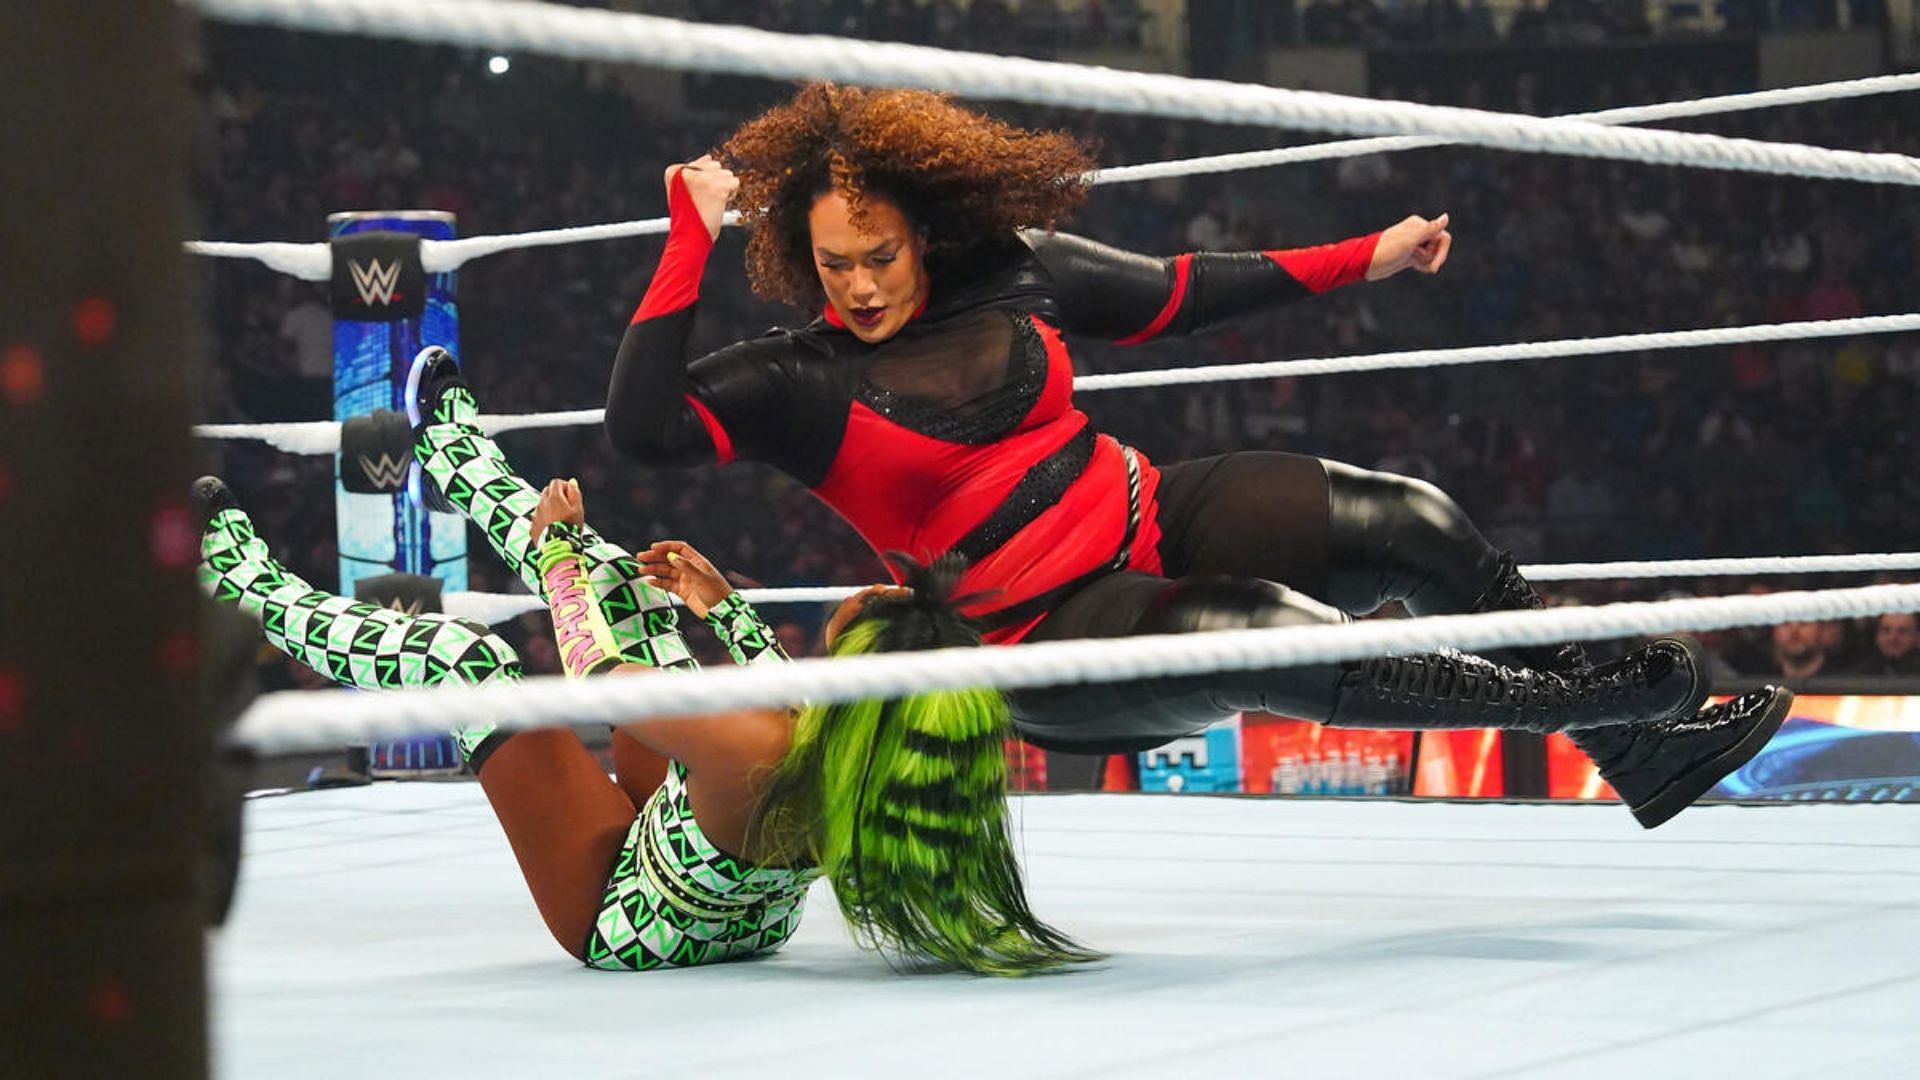 Nia Jax during her match with Naomi on SmackDown, which she won.